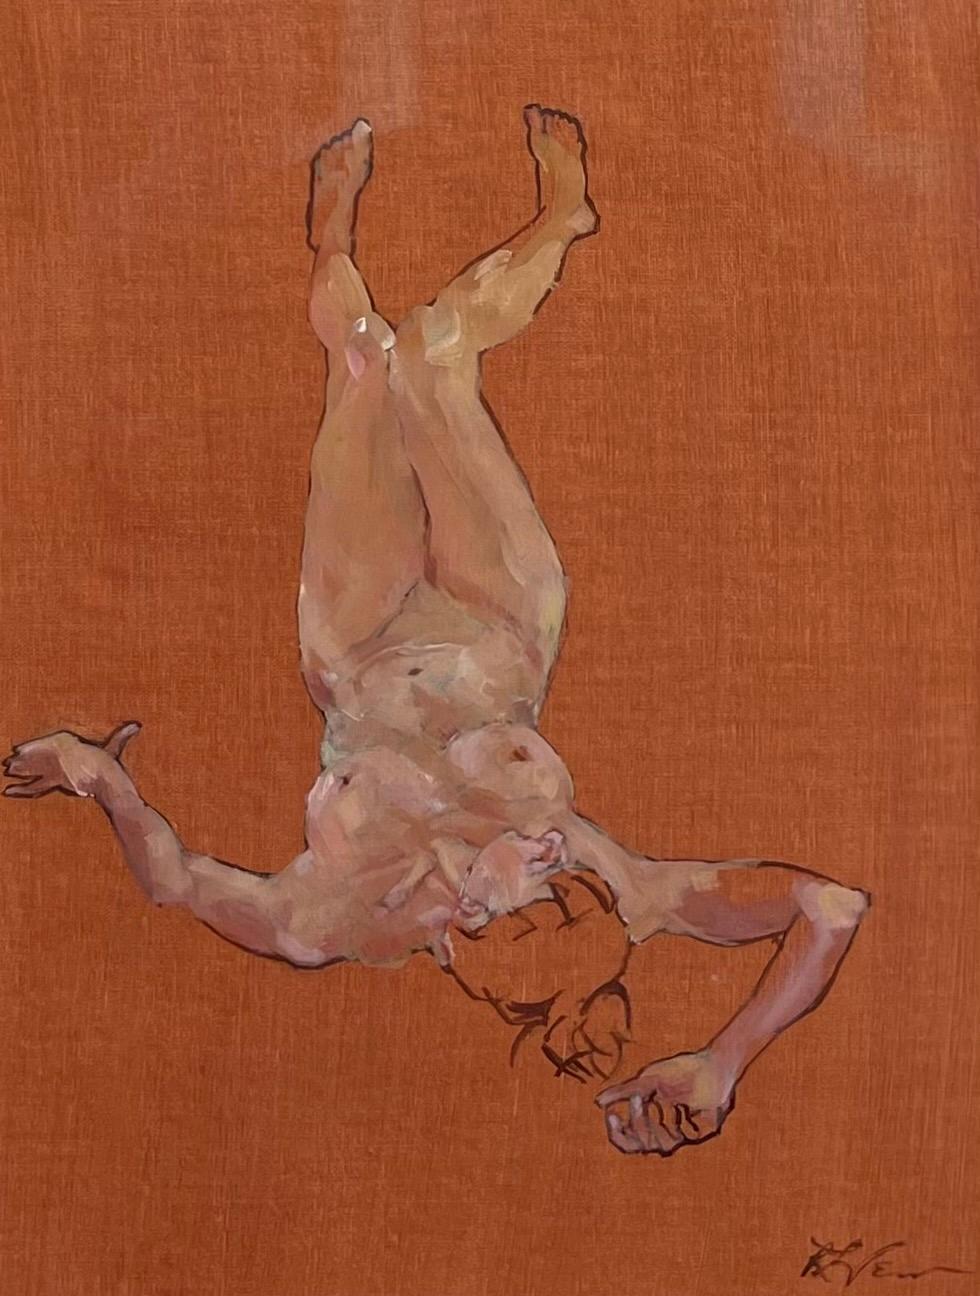 Rebecca Venn Portrait Painting - "Untitled" - Oil Painting of Nude Reclining Female Figure